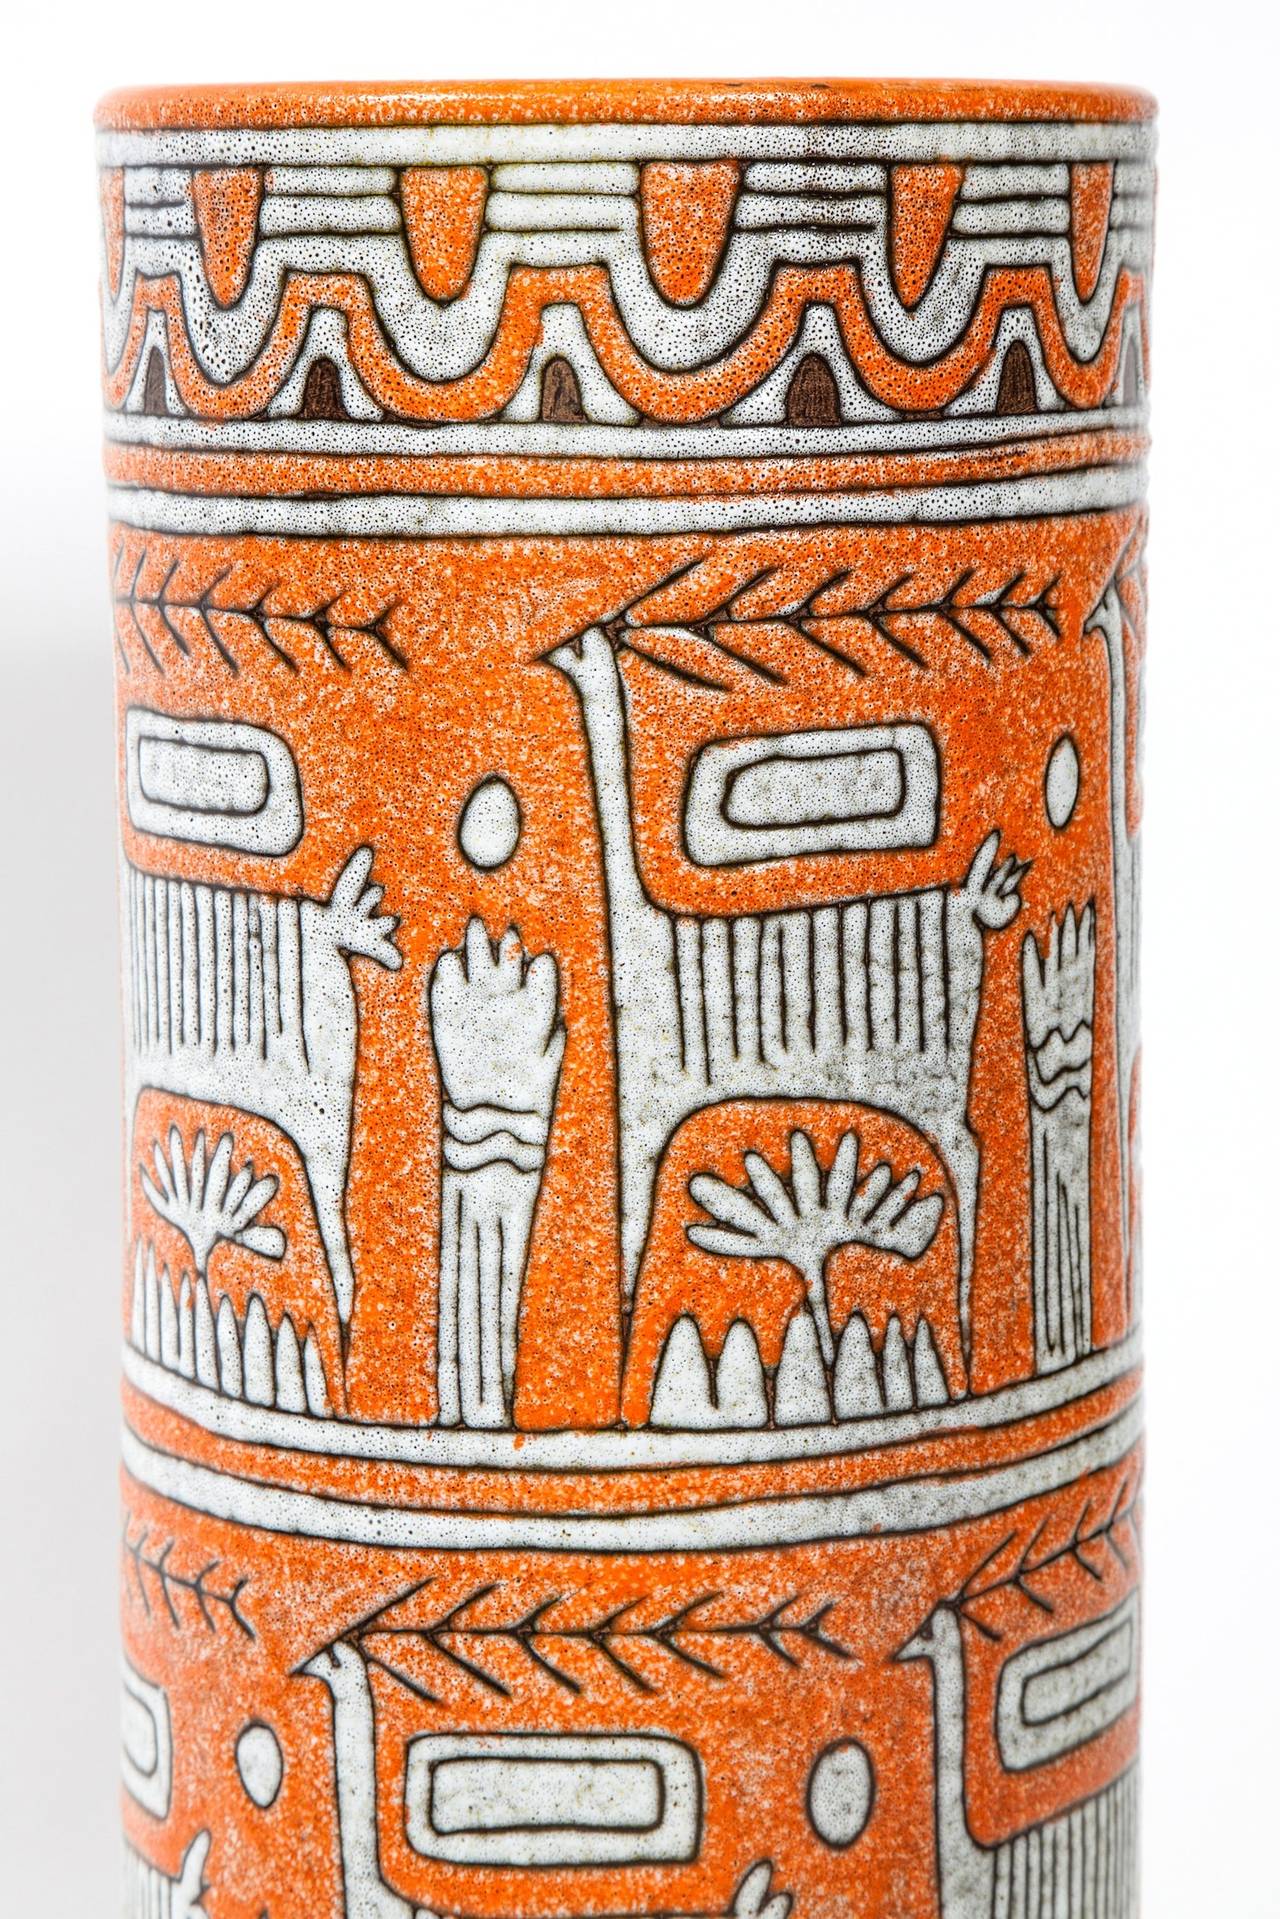 A beautifully mastered and rare extra-large floor vase with a graphic deer motif in a textured orange, white and black design with a blue gray interior glaze, circa 1950s. It's in keeping with the great ceramic masters of the time period like